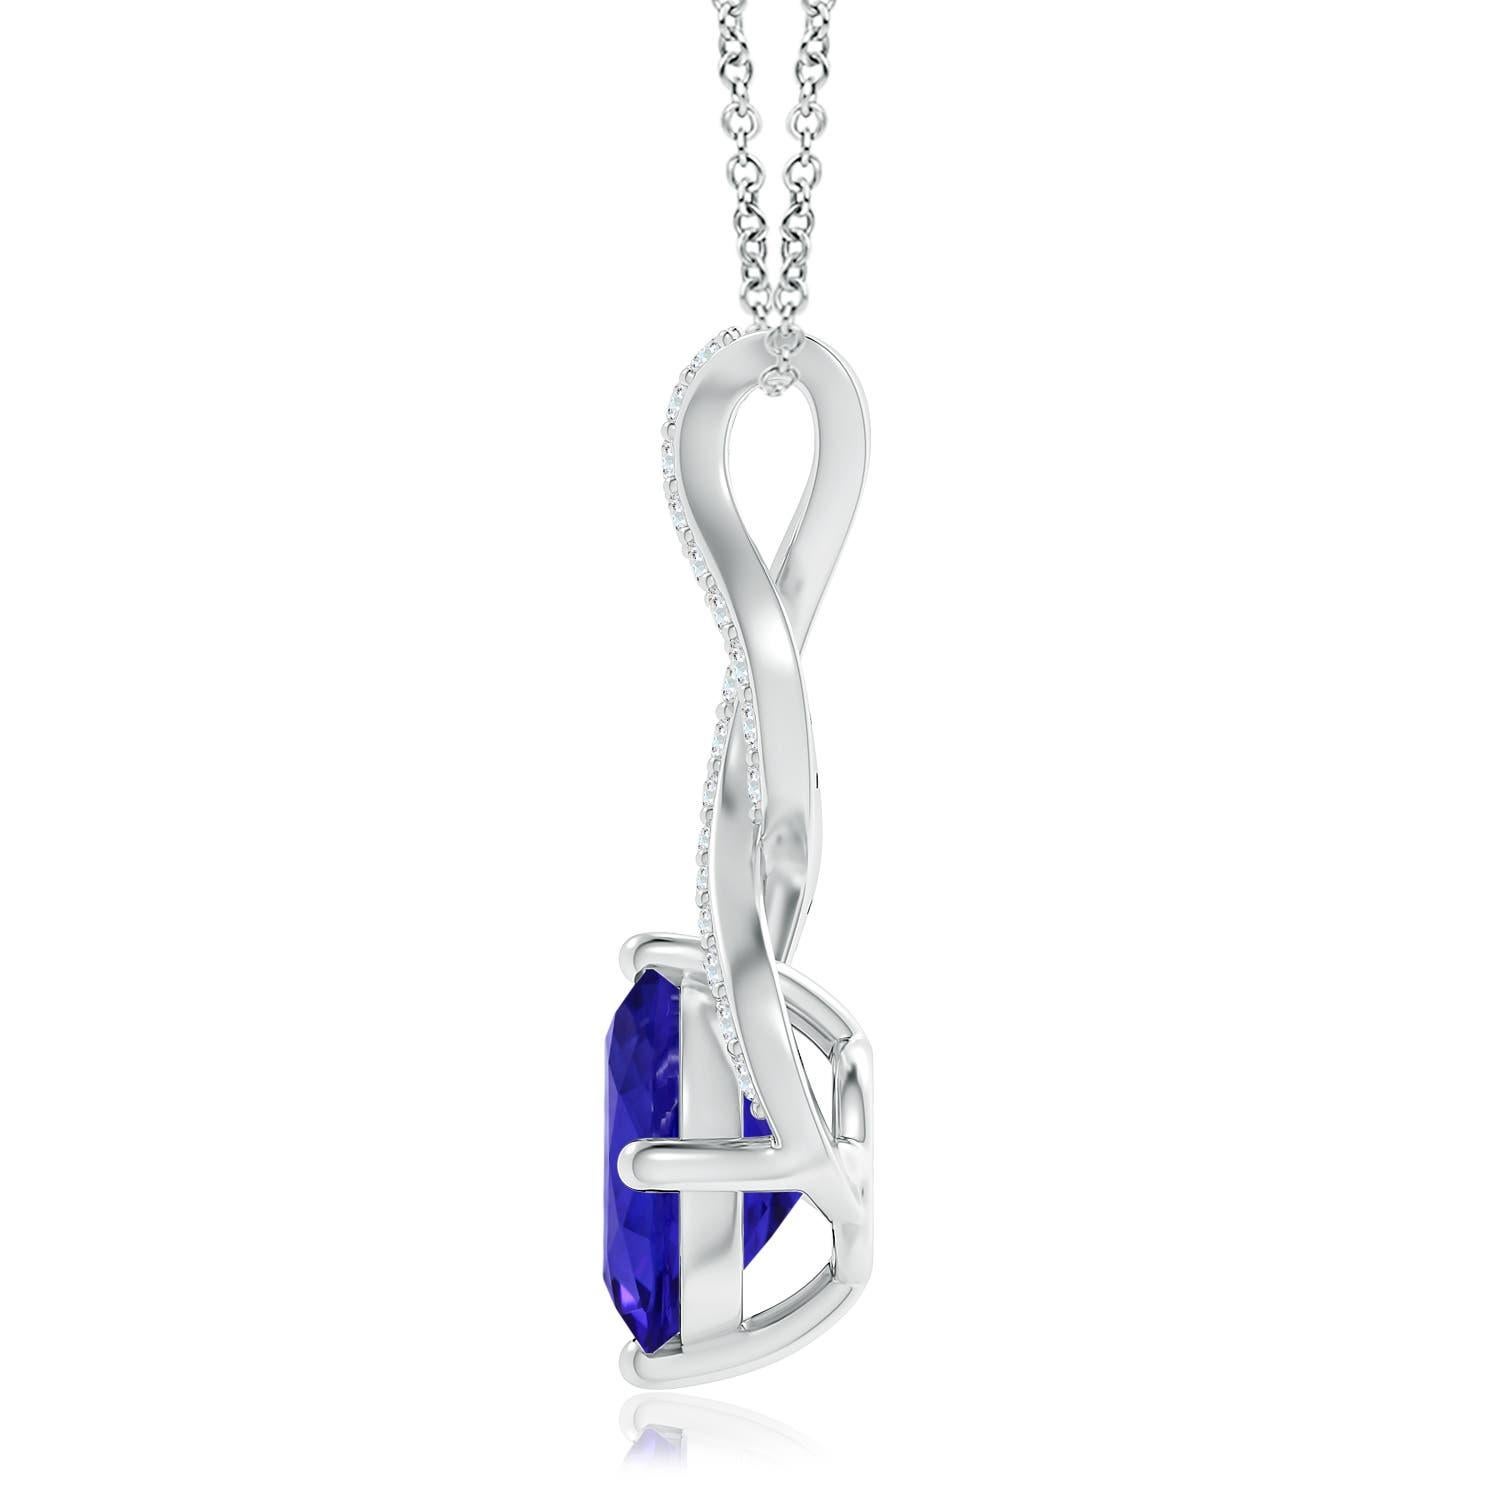 A beautiful interpretation of the iconic infinity sign, this 18k white gold tanzanite pendant features a dazzling infinity-shaped bale. The prong-set GIA certified tanzanite is accentuated by the brilliant diamonds on the twisted bale.
